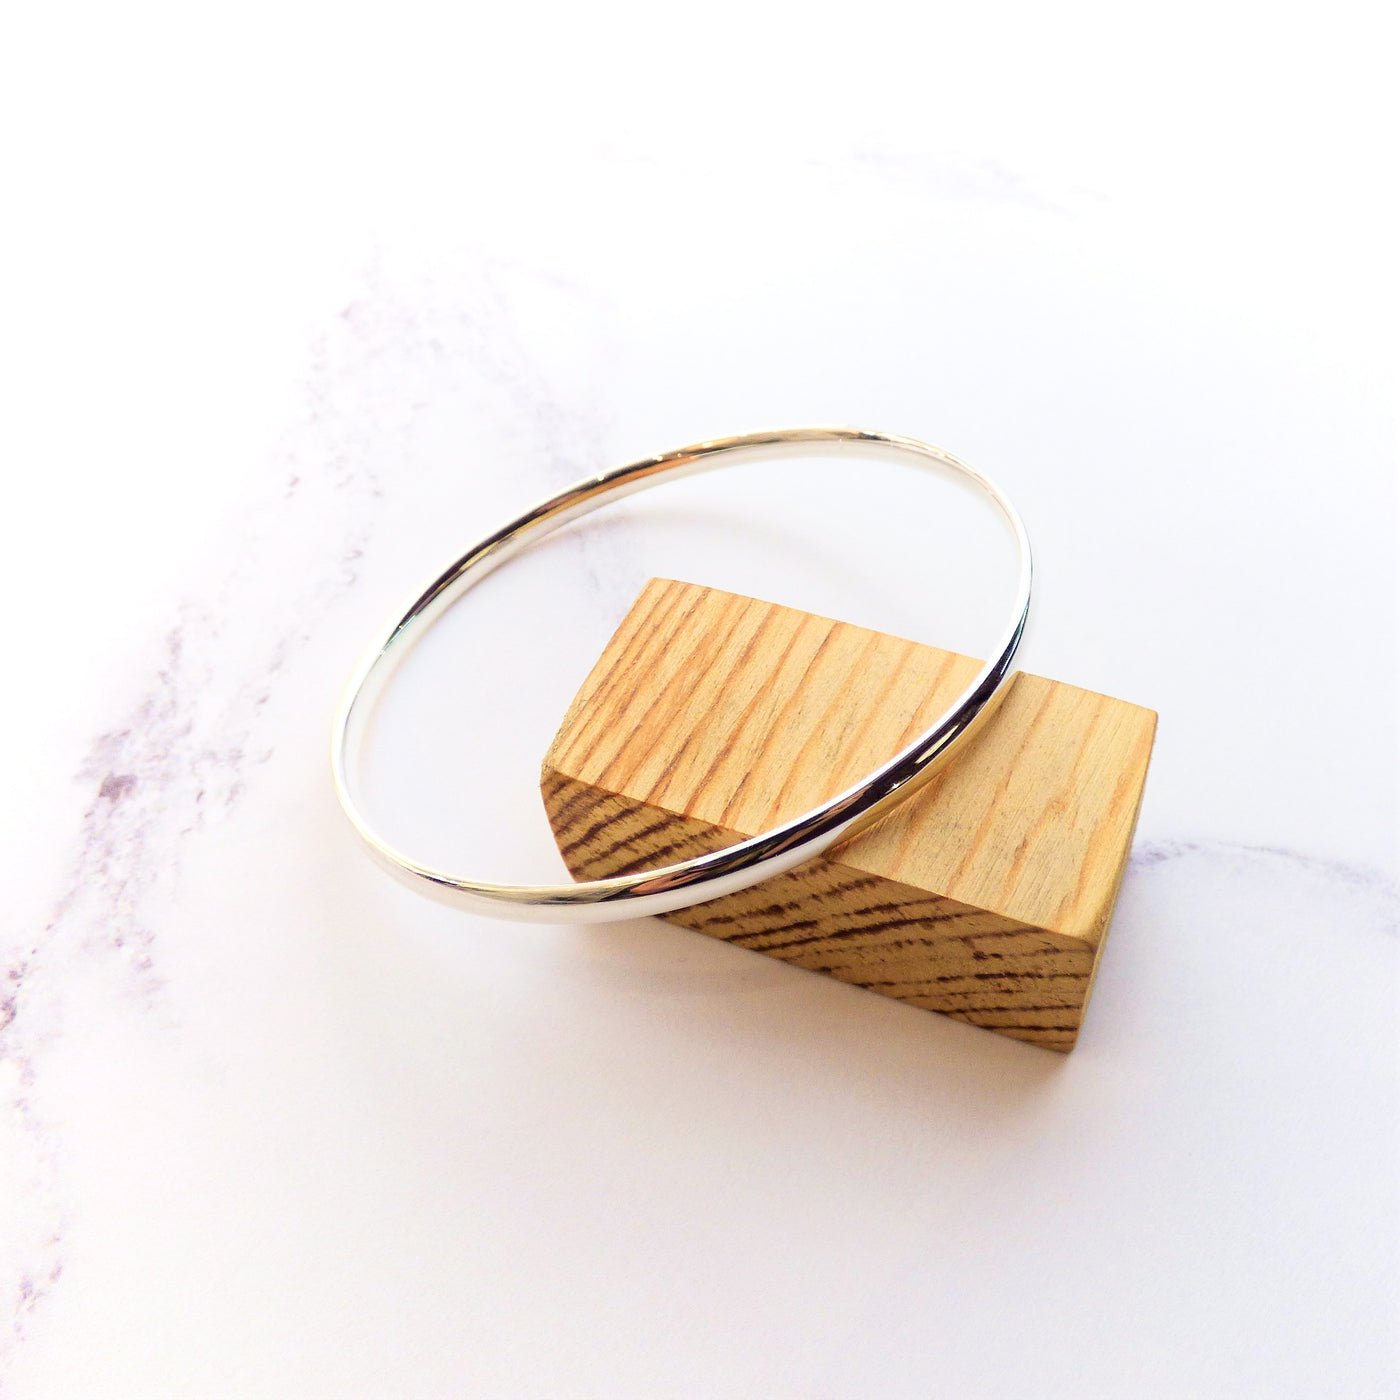 Silver Oval Section Bangle